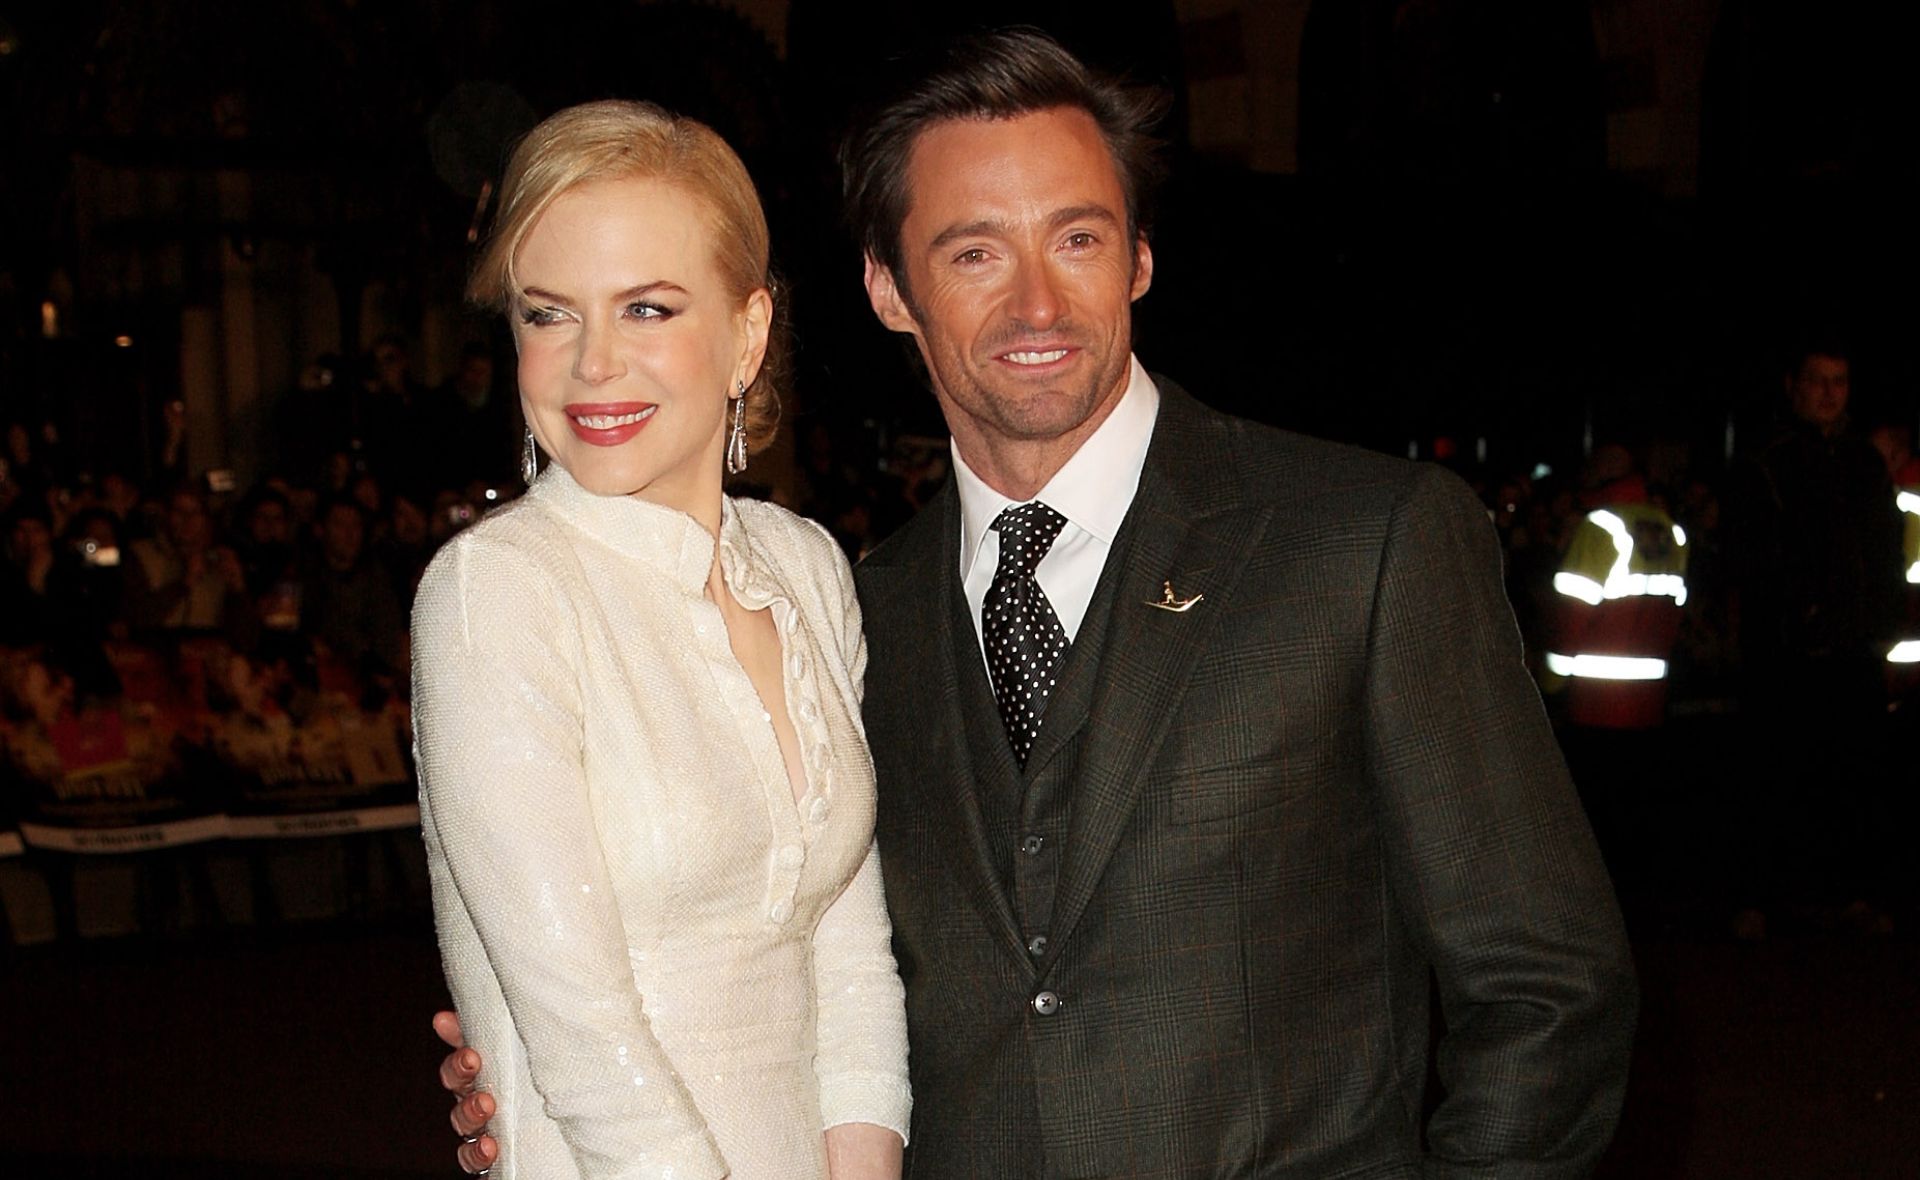 Nicole Kidman surprises Hugh Jackman on stage with a very generous act